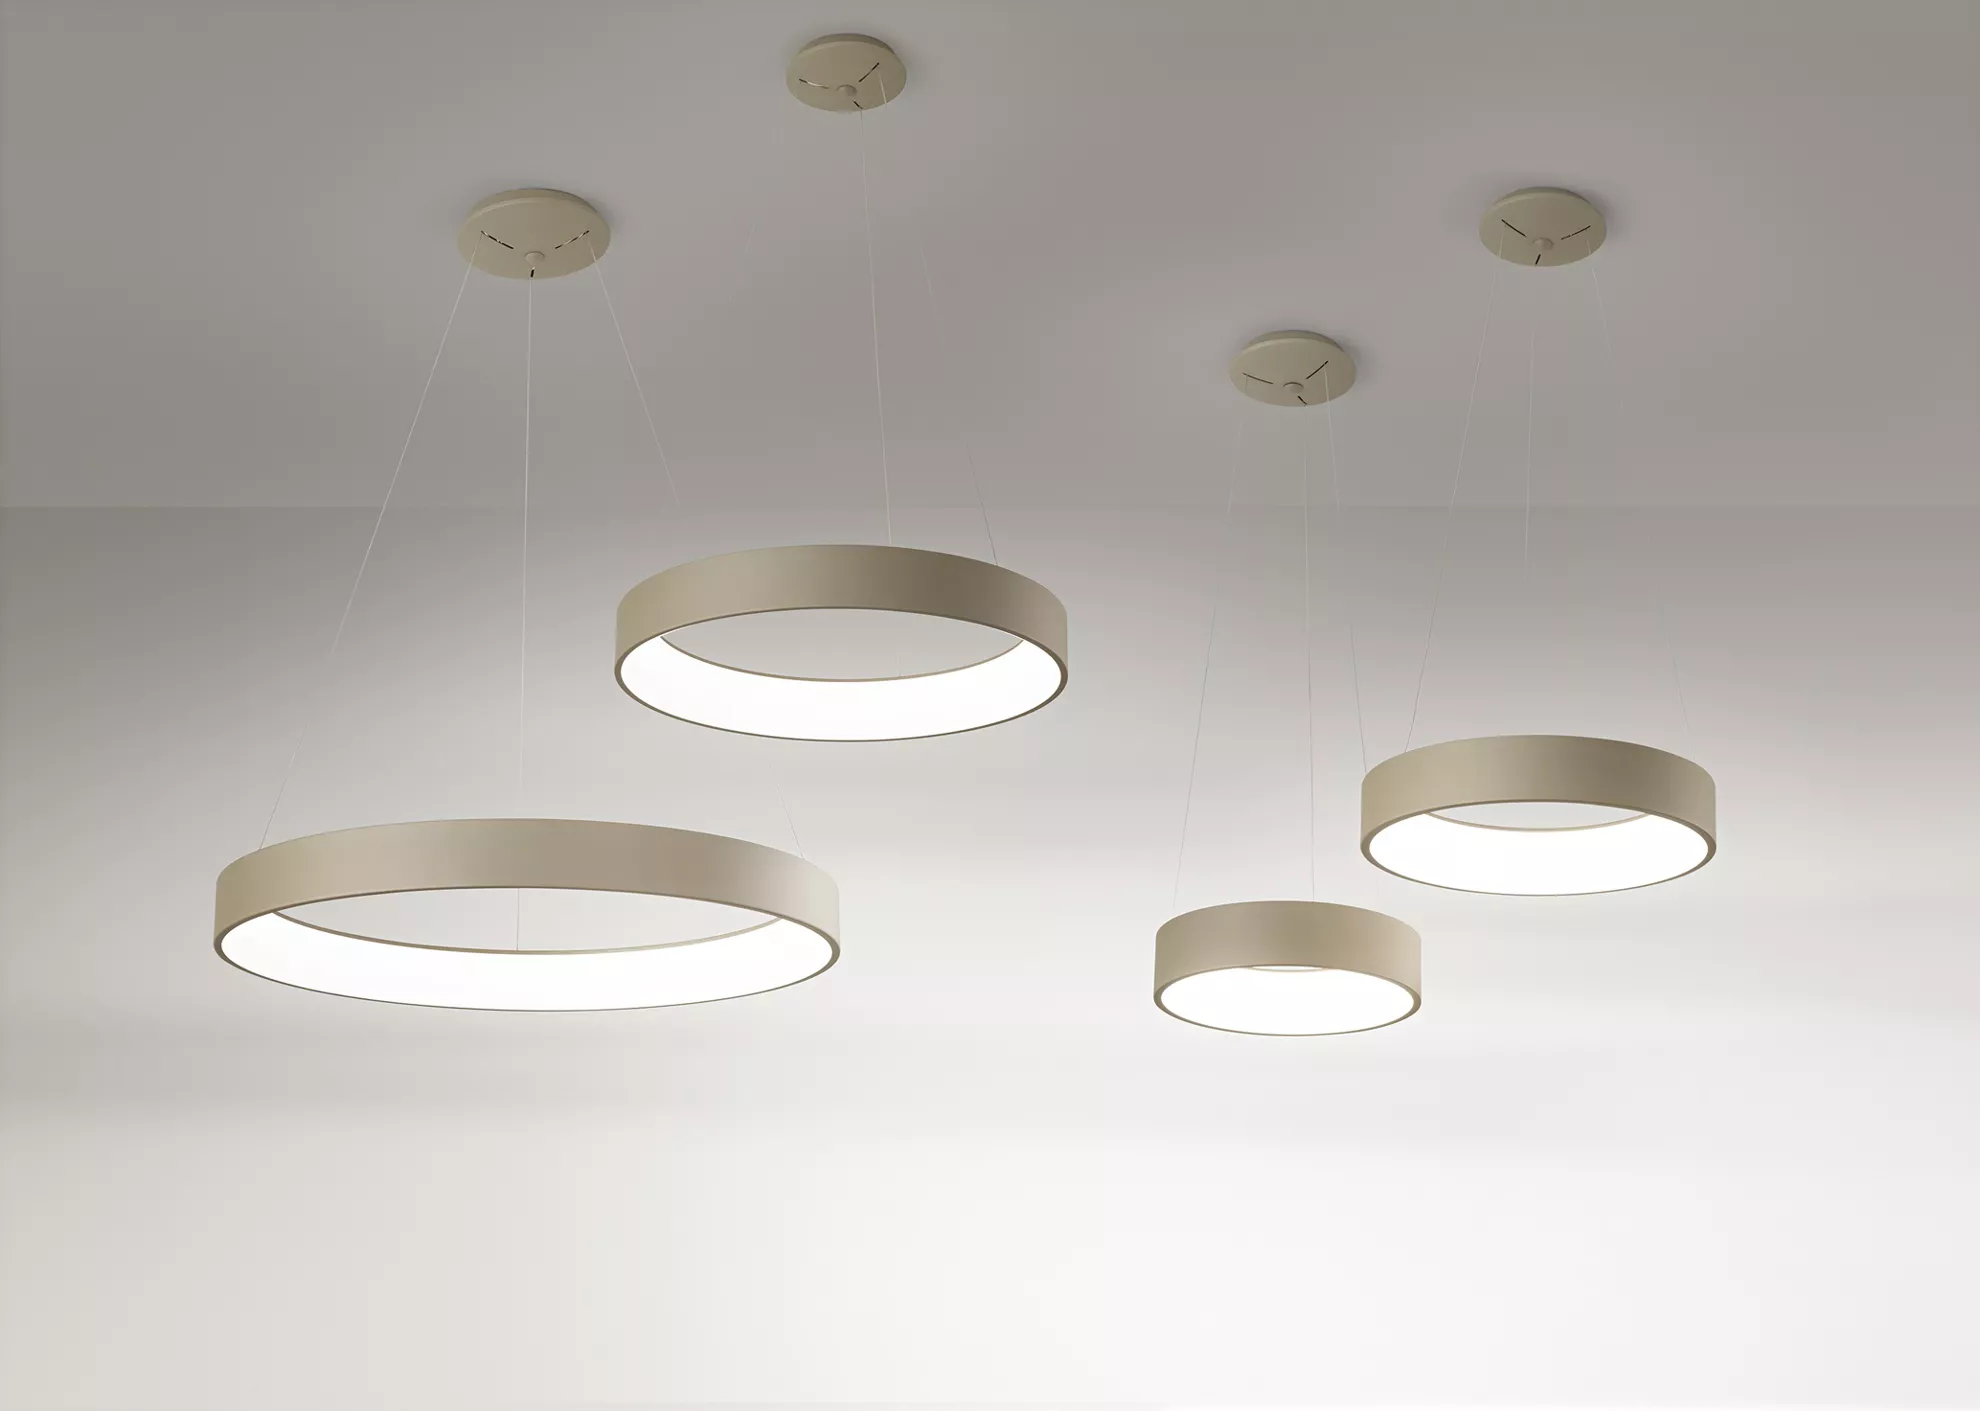 here you could find the perfect modern pendant light for your home.